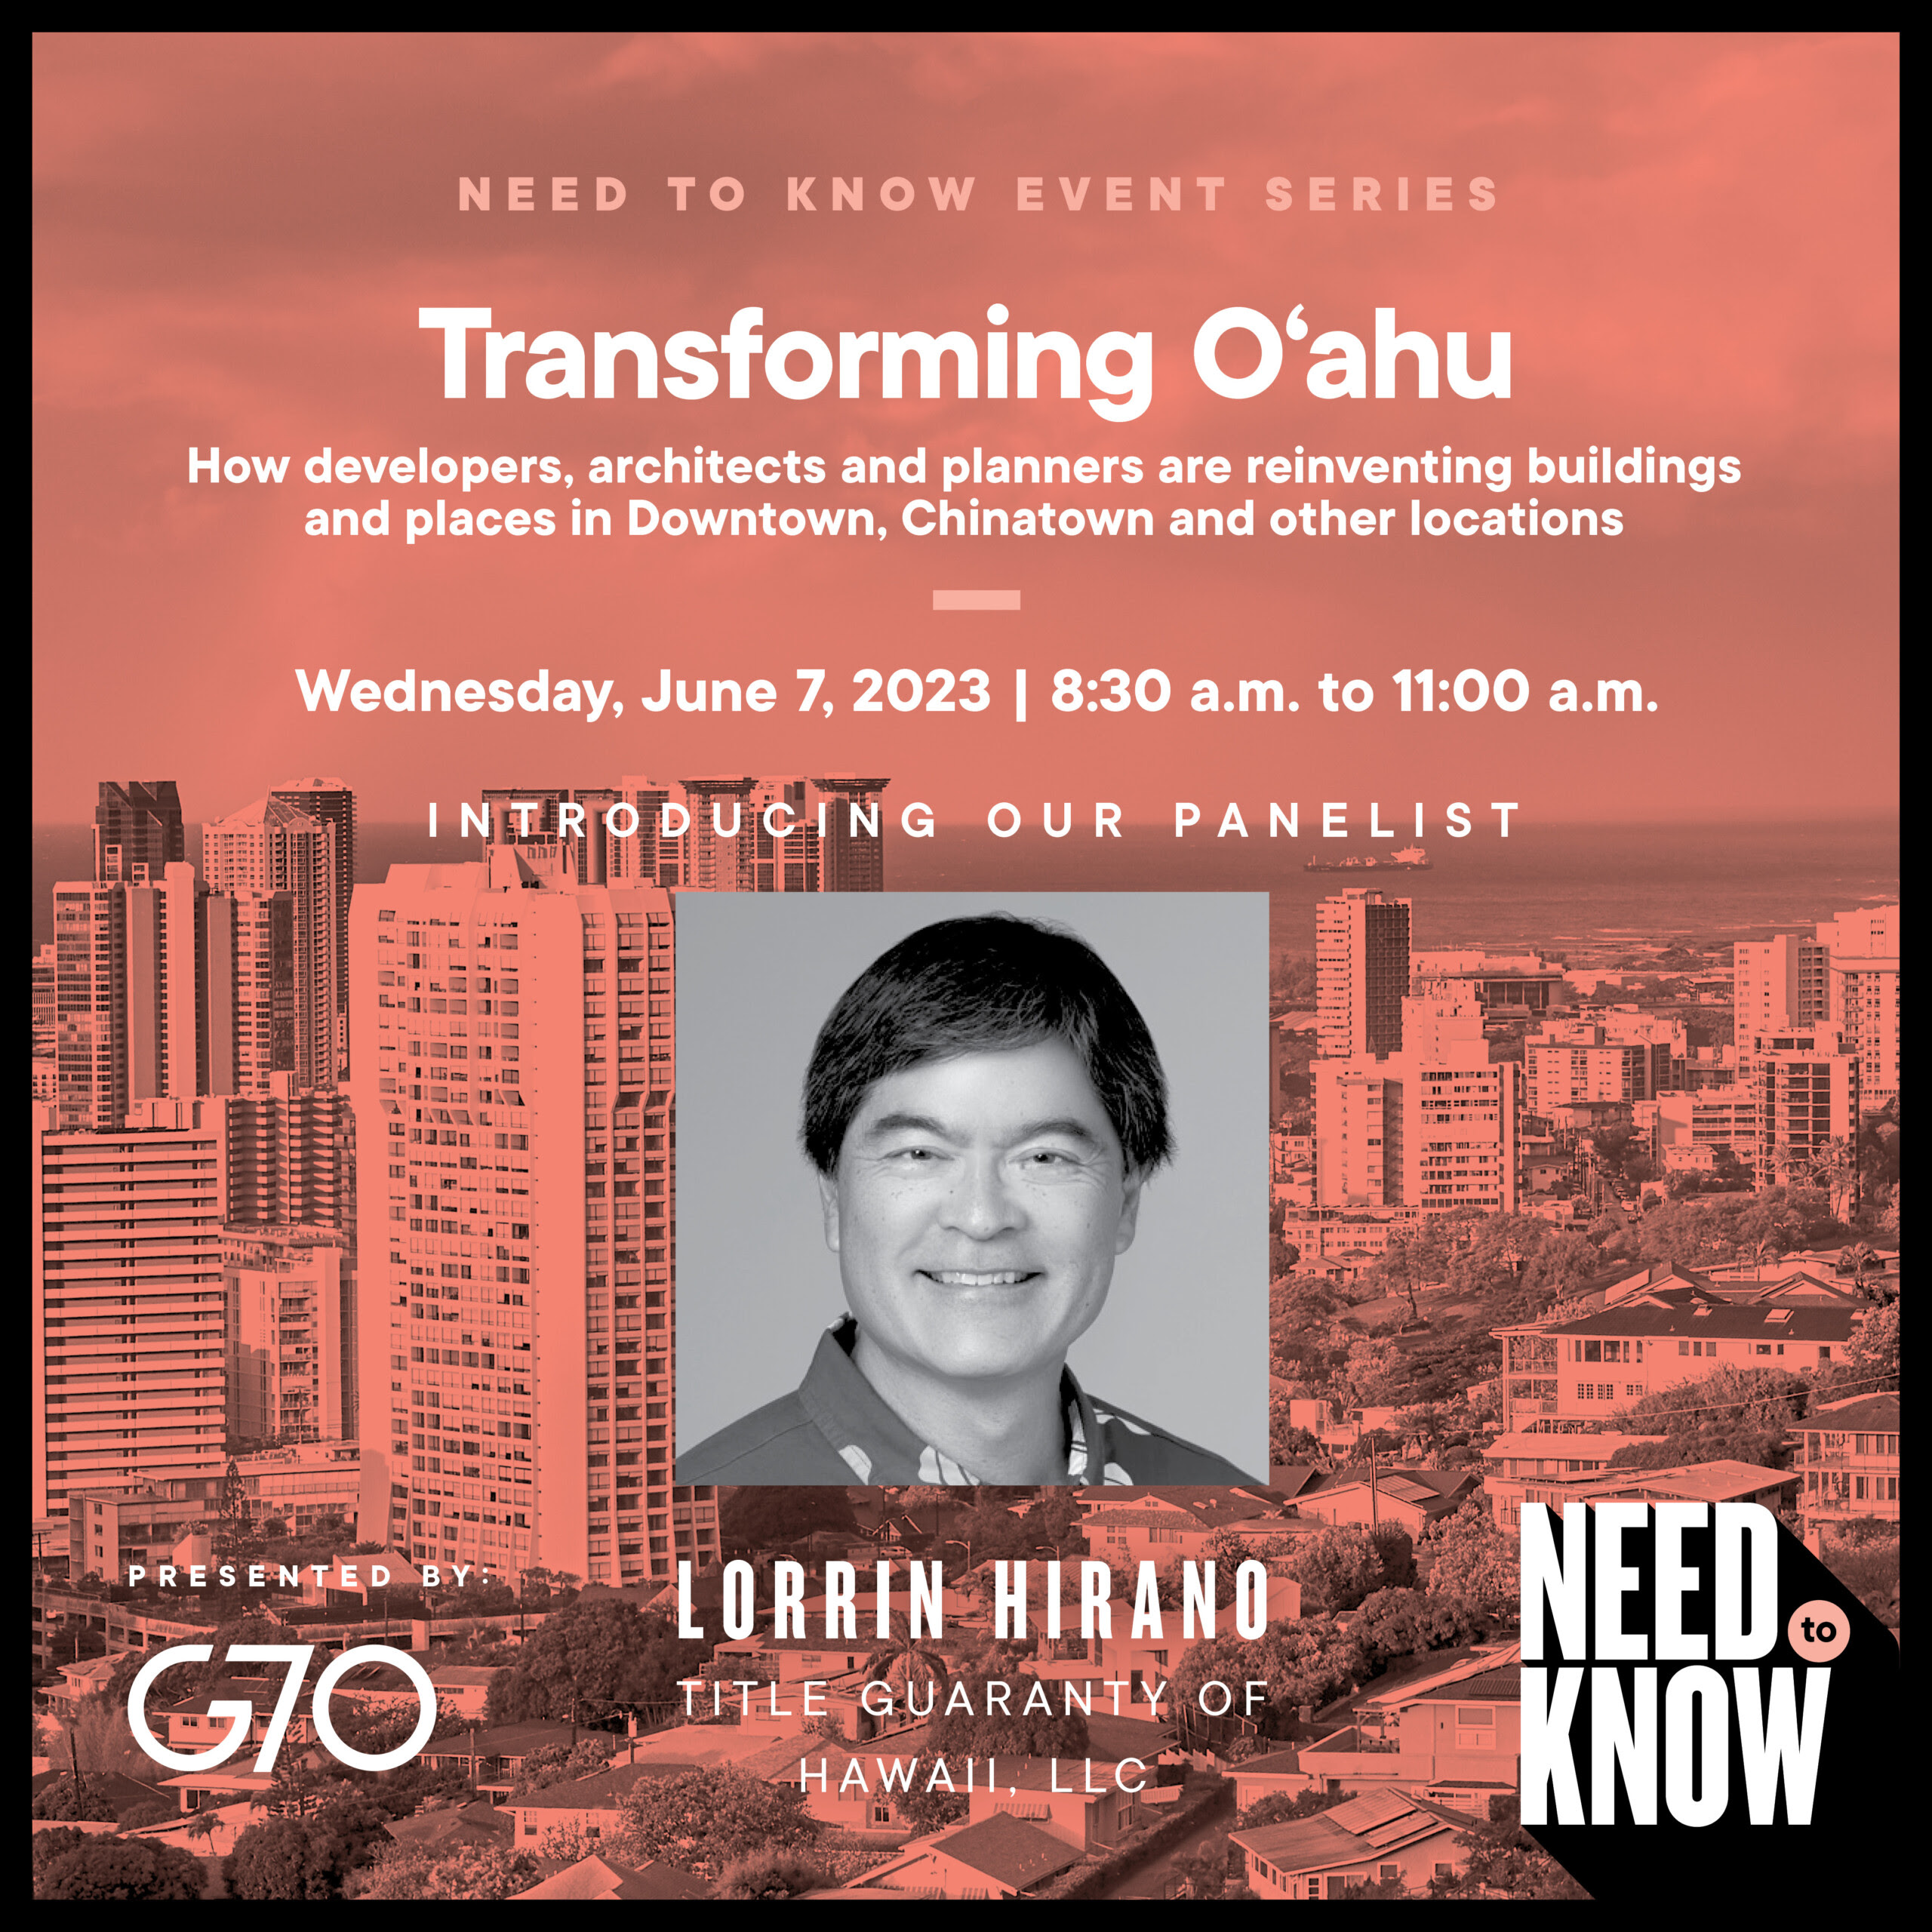 Click here to register for Need to Know: Transforming O'ahu on Wednesday, June 7 at Fuller Hall, YWCA!